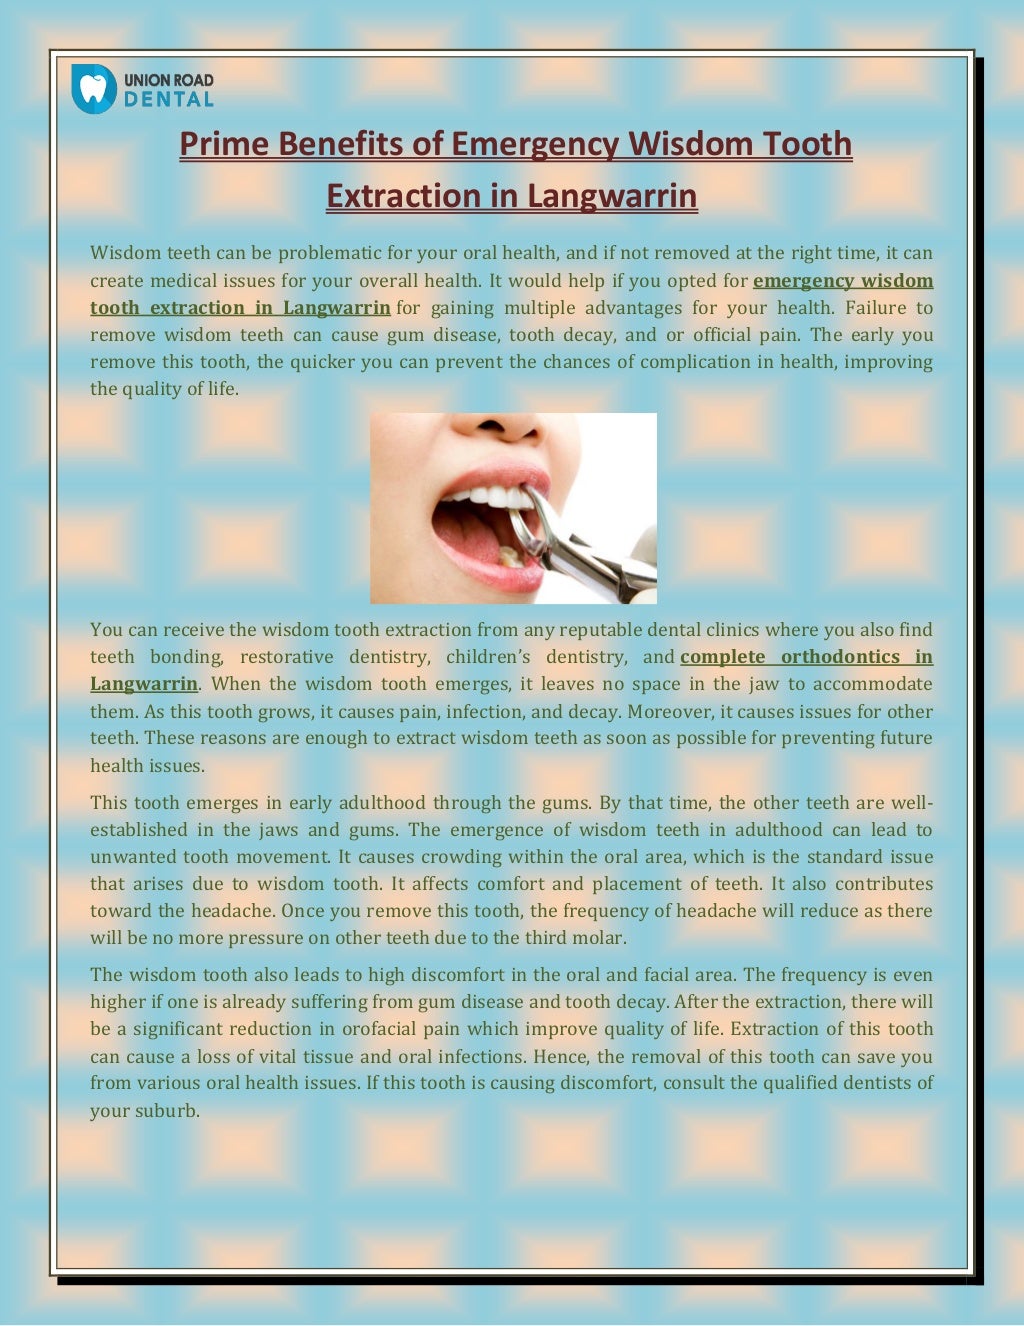 Prime Benefits Of Emergency Wisdom Tooth Extraction In Langwarrin